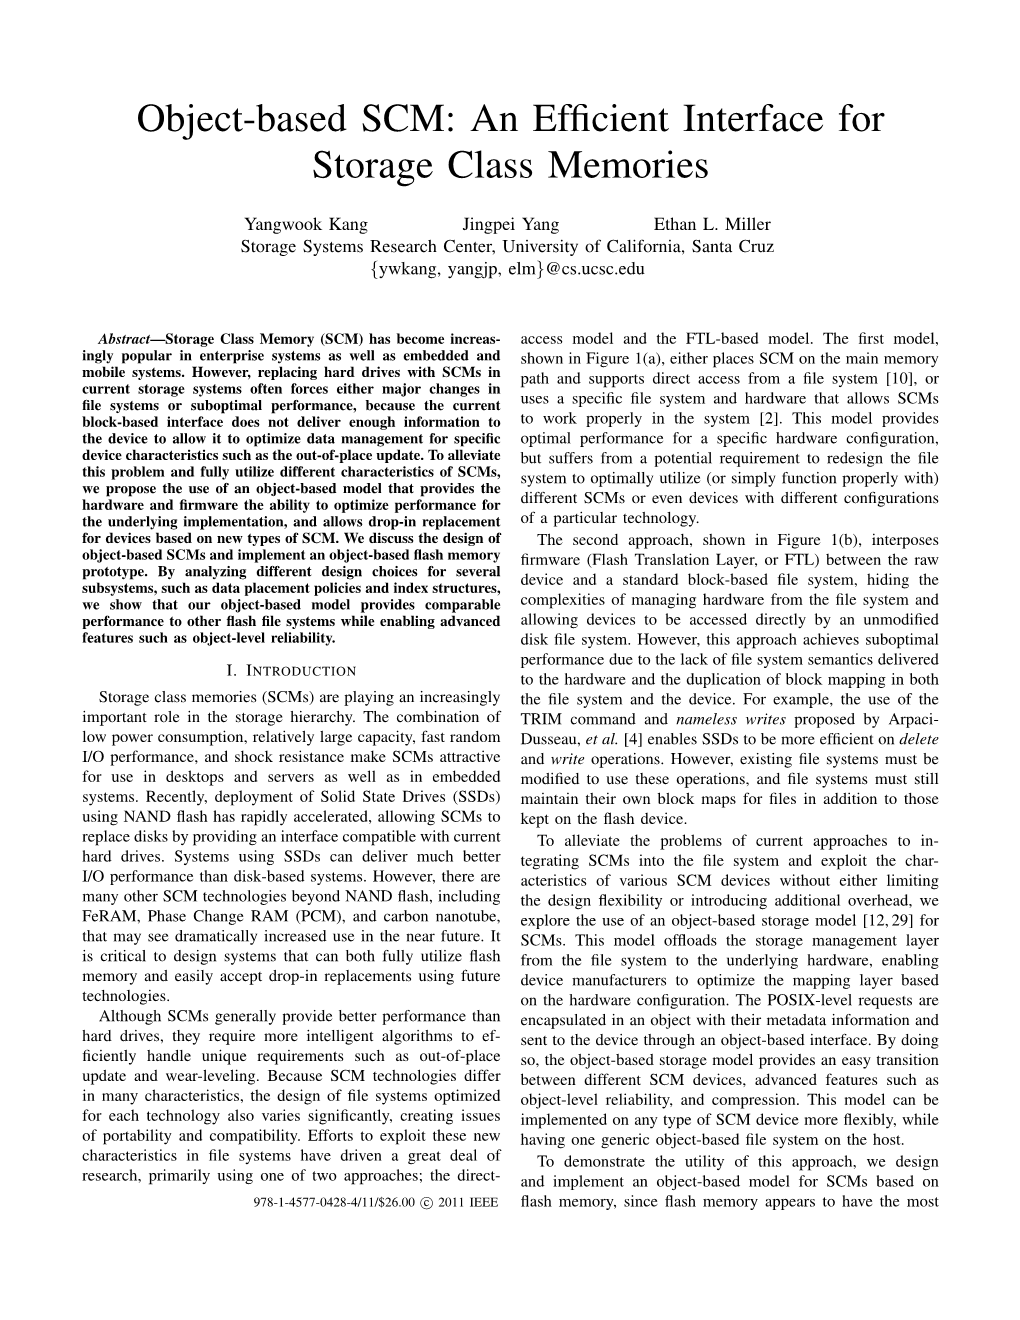 Object-Based SCM: an Efﬁcient Interface for Storage Class Memories